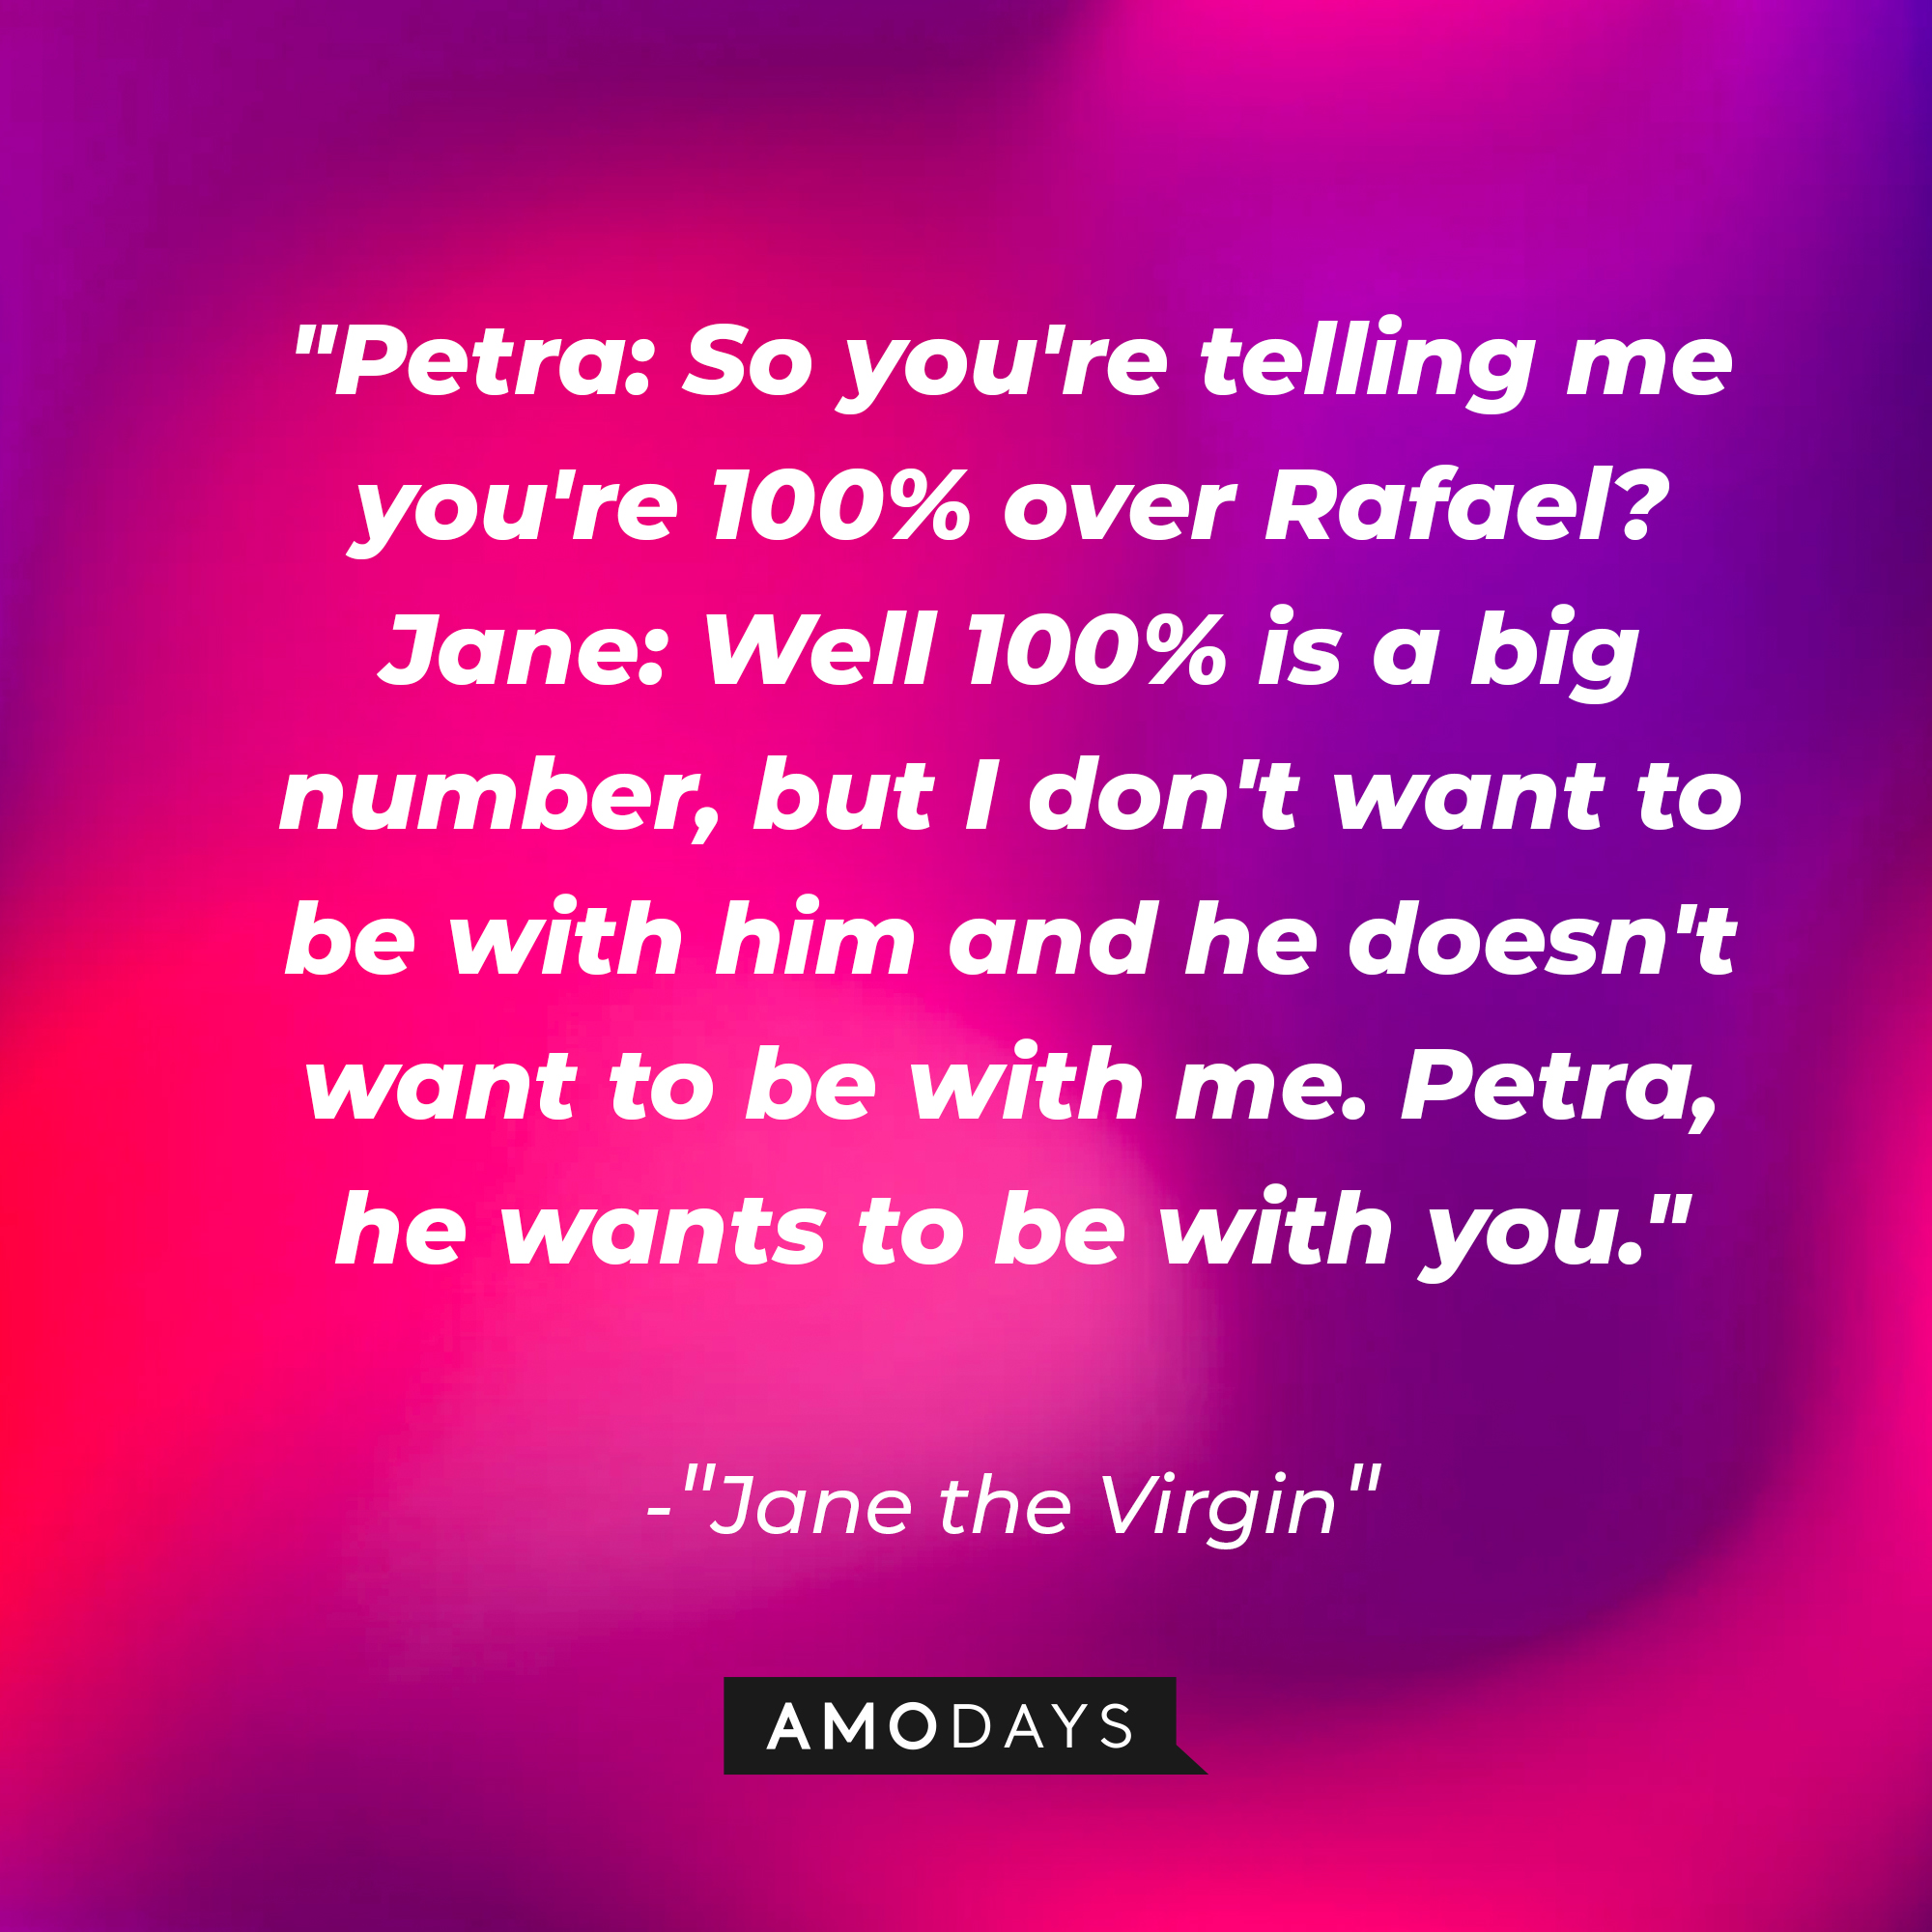 Jane Villanueva's dialogue in "Jane the Virgin:" "Petra: So you're telling me you're 100% over Rafael? ; Jane: Well 100% is a big number, but I don't want to be with him and he doesn't want to be with me. Petra, he wants to be with you." | Source: Amodays